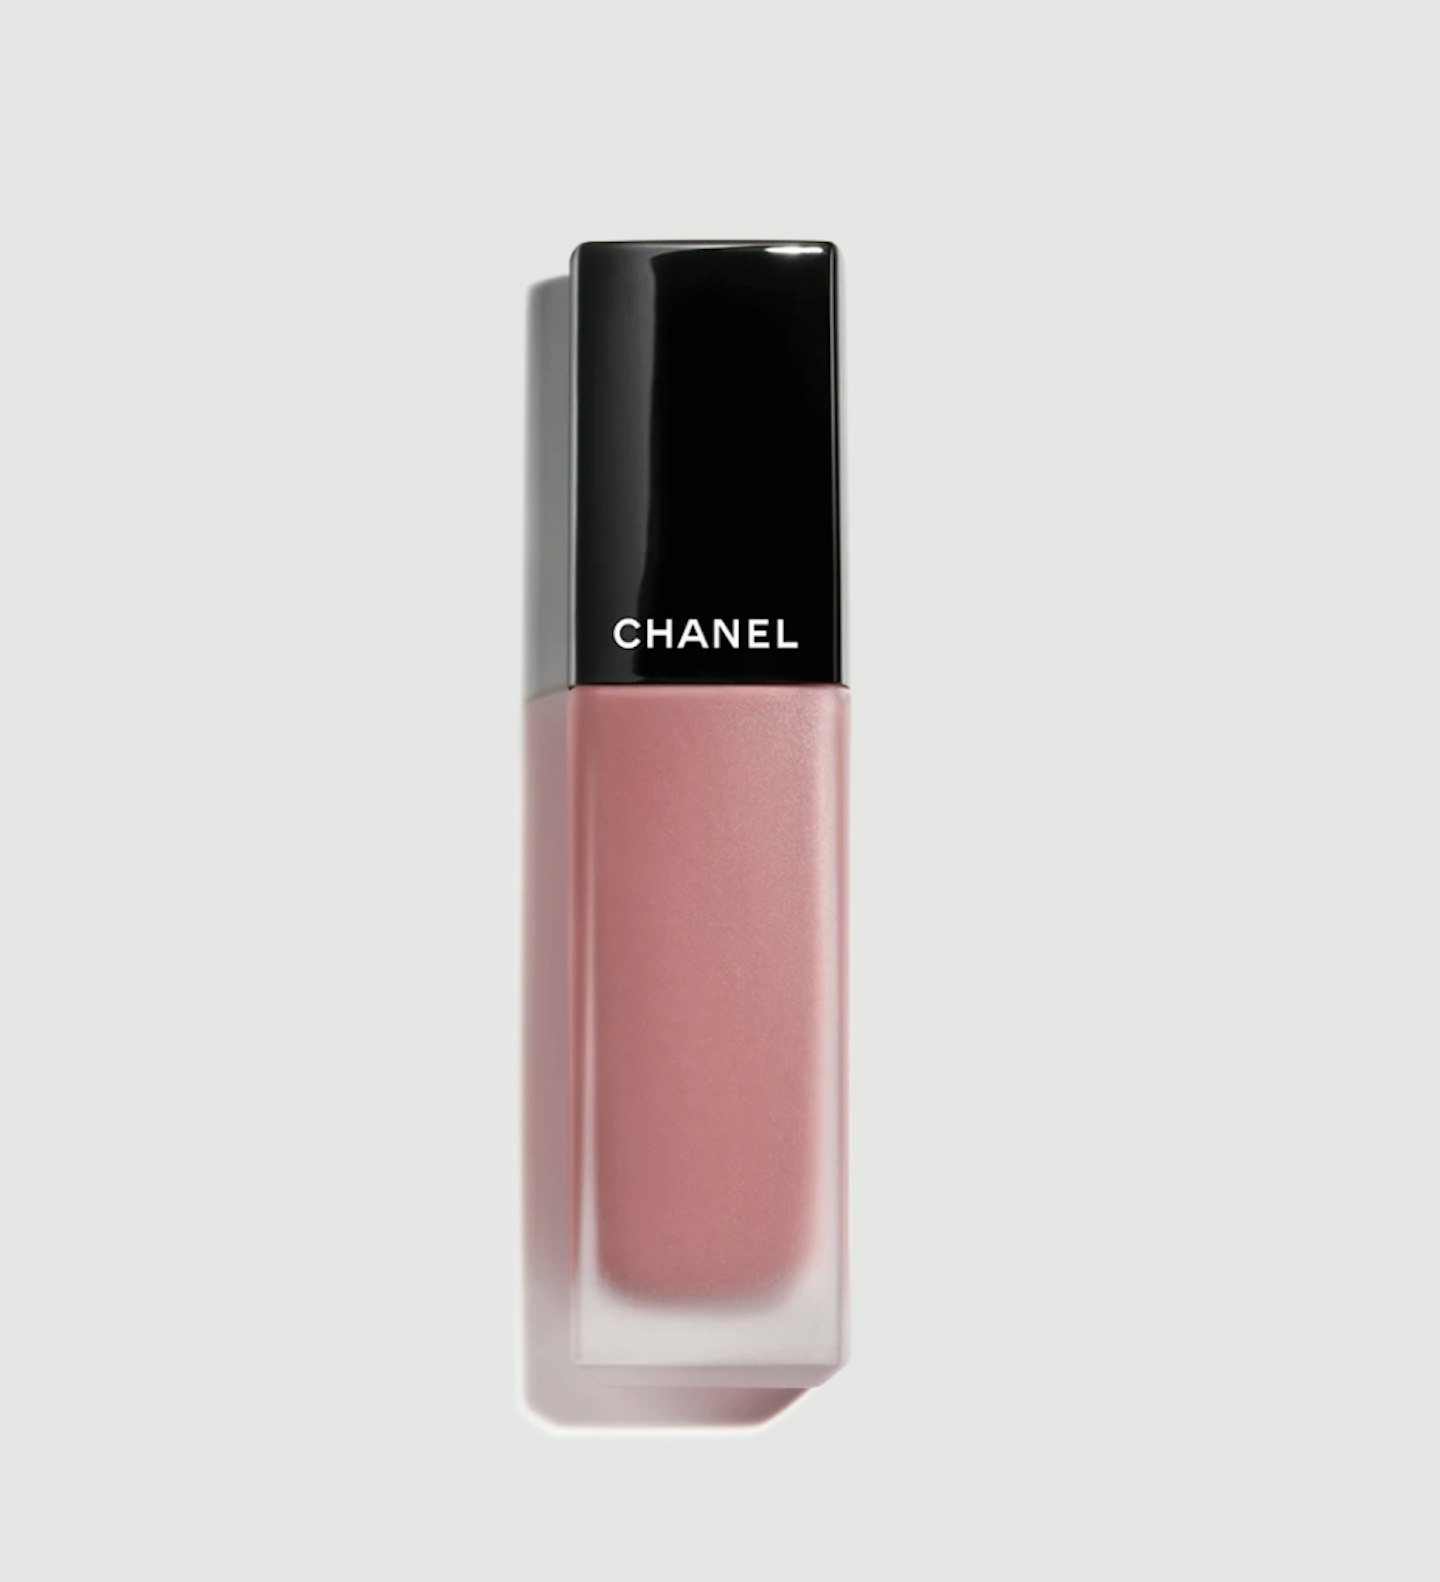 Chanel's Rouge Allure Ink in Serenity